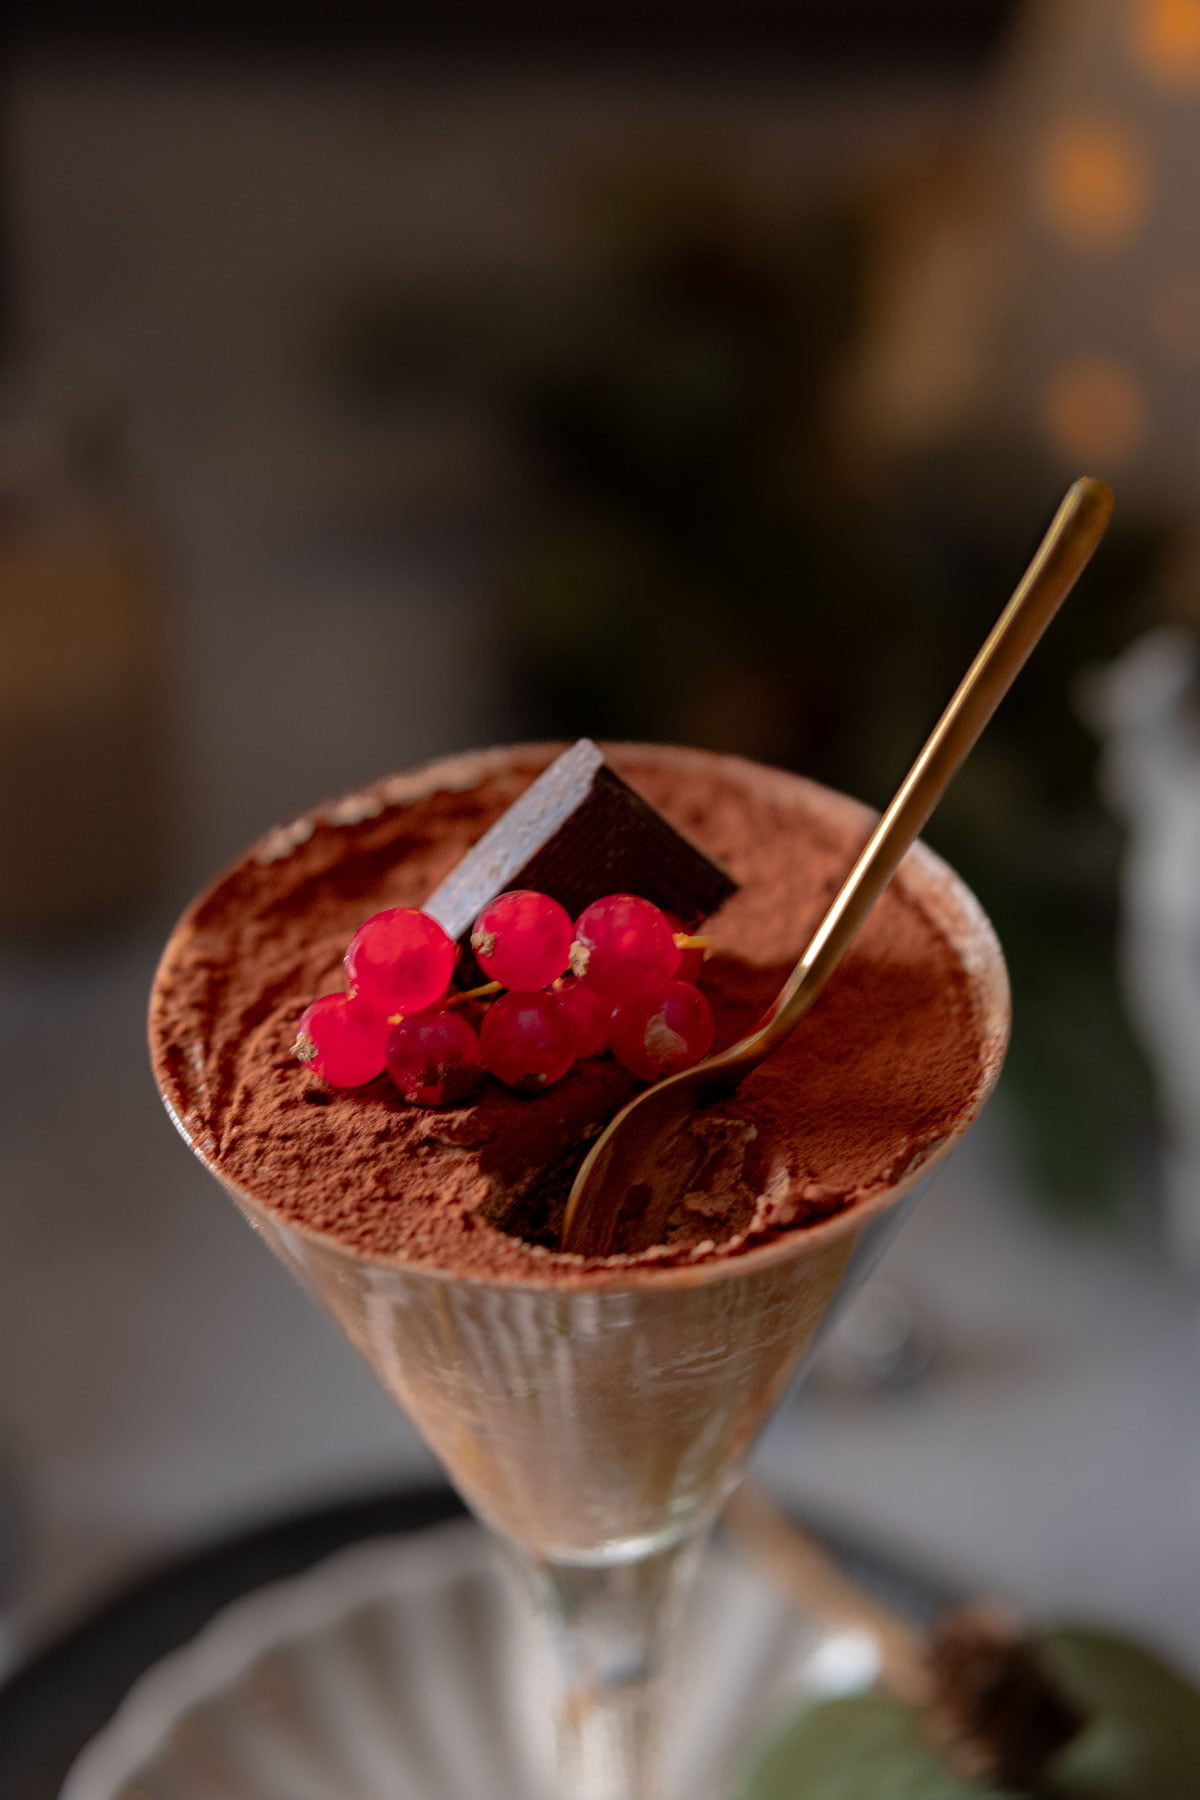 Chocolate mousse in a glass dusted with cocoa powder and topped with red currants and a block of chocolate